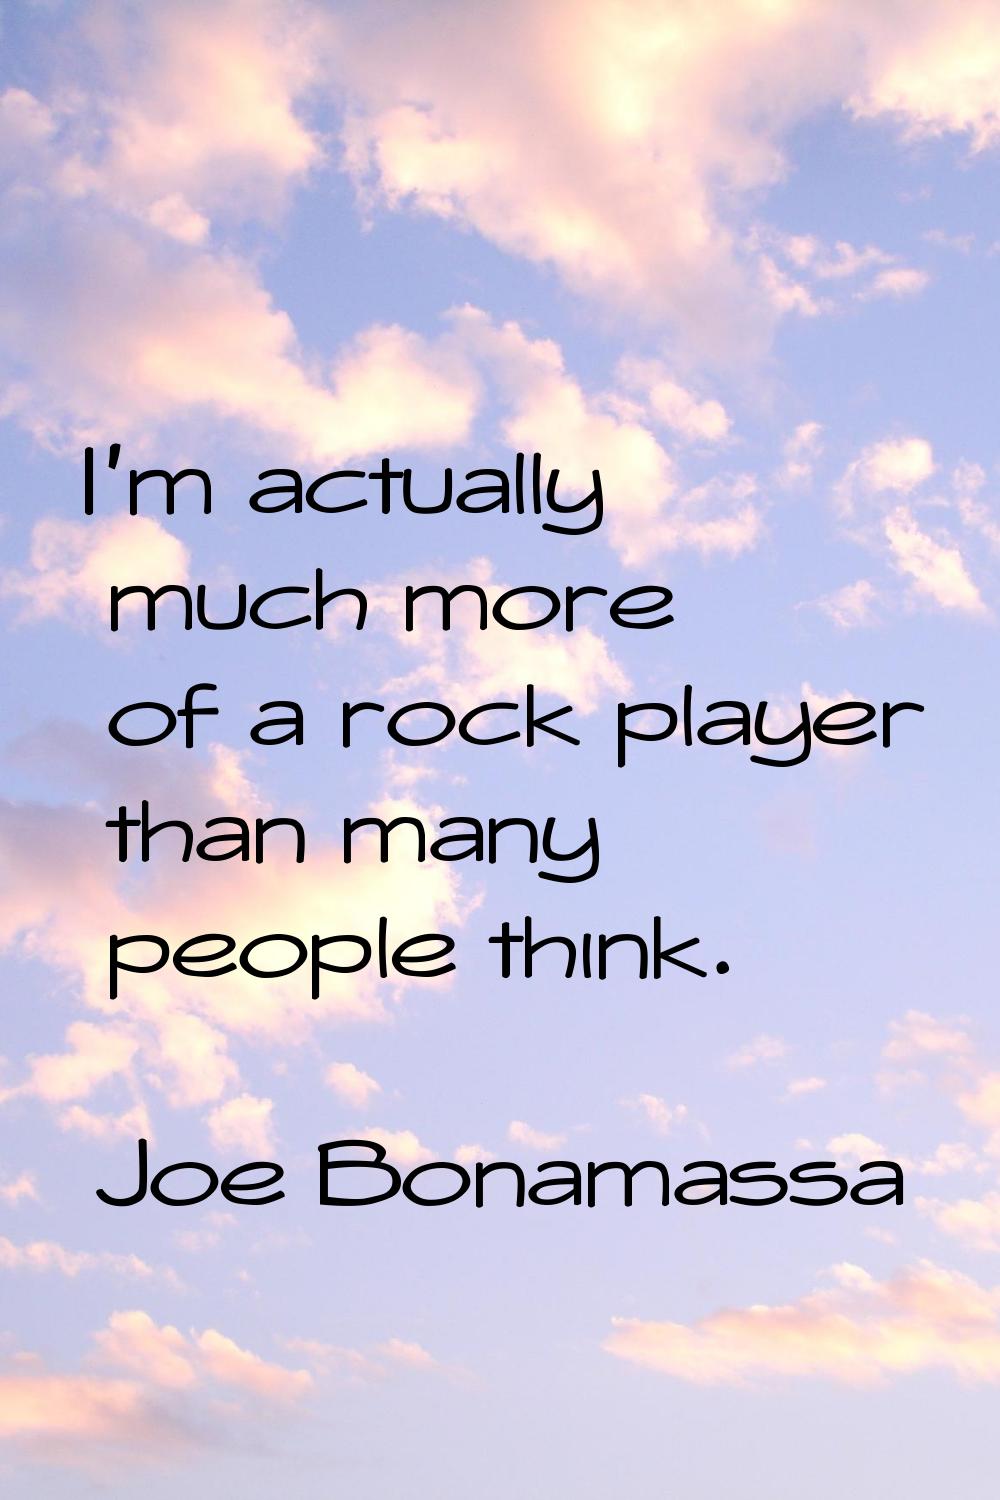 I'm actually much more of a rock player than many people think.